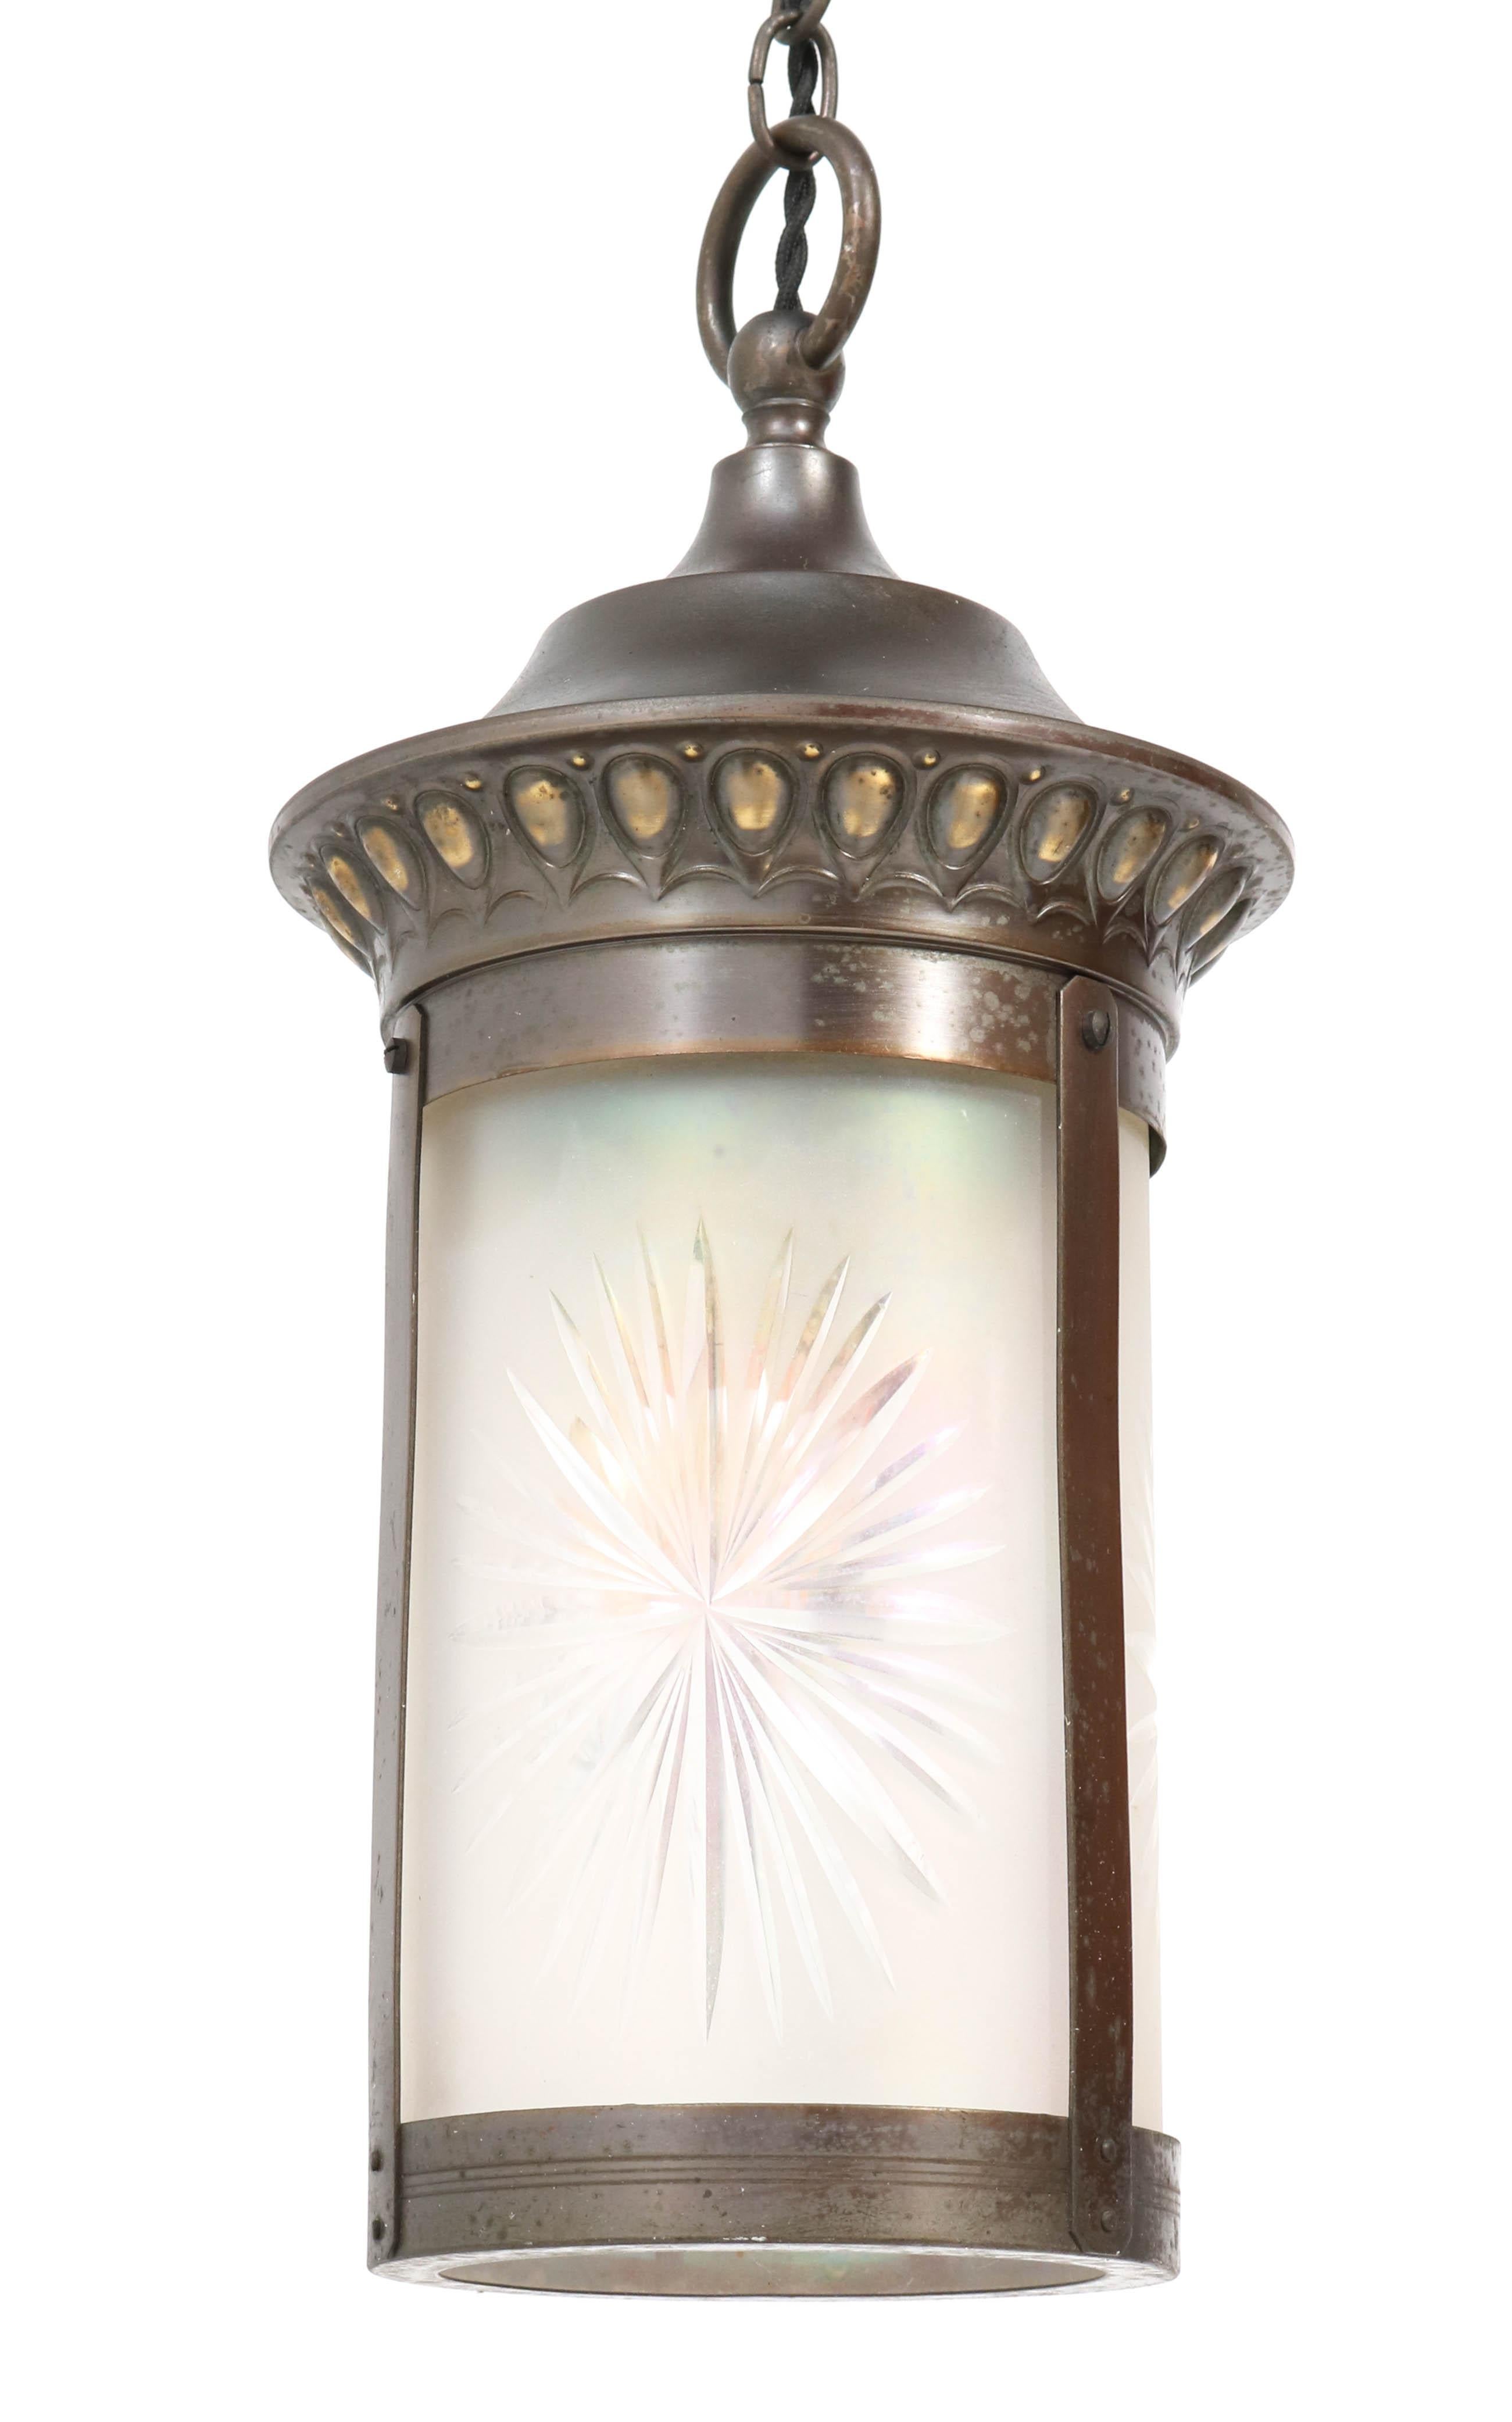 Early 20th Century Patinated Brass Art Nouveau Lantern with Etched Glass, 1900s For Sale